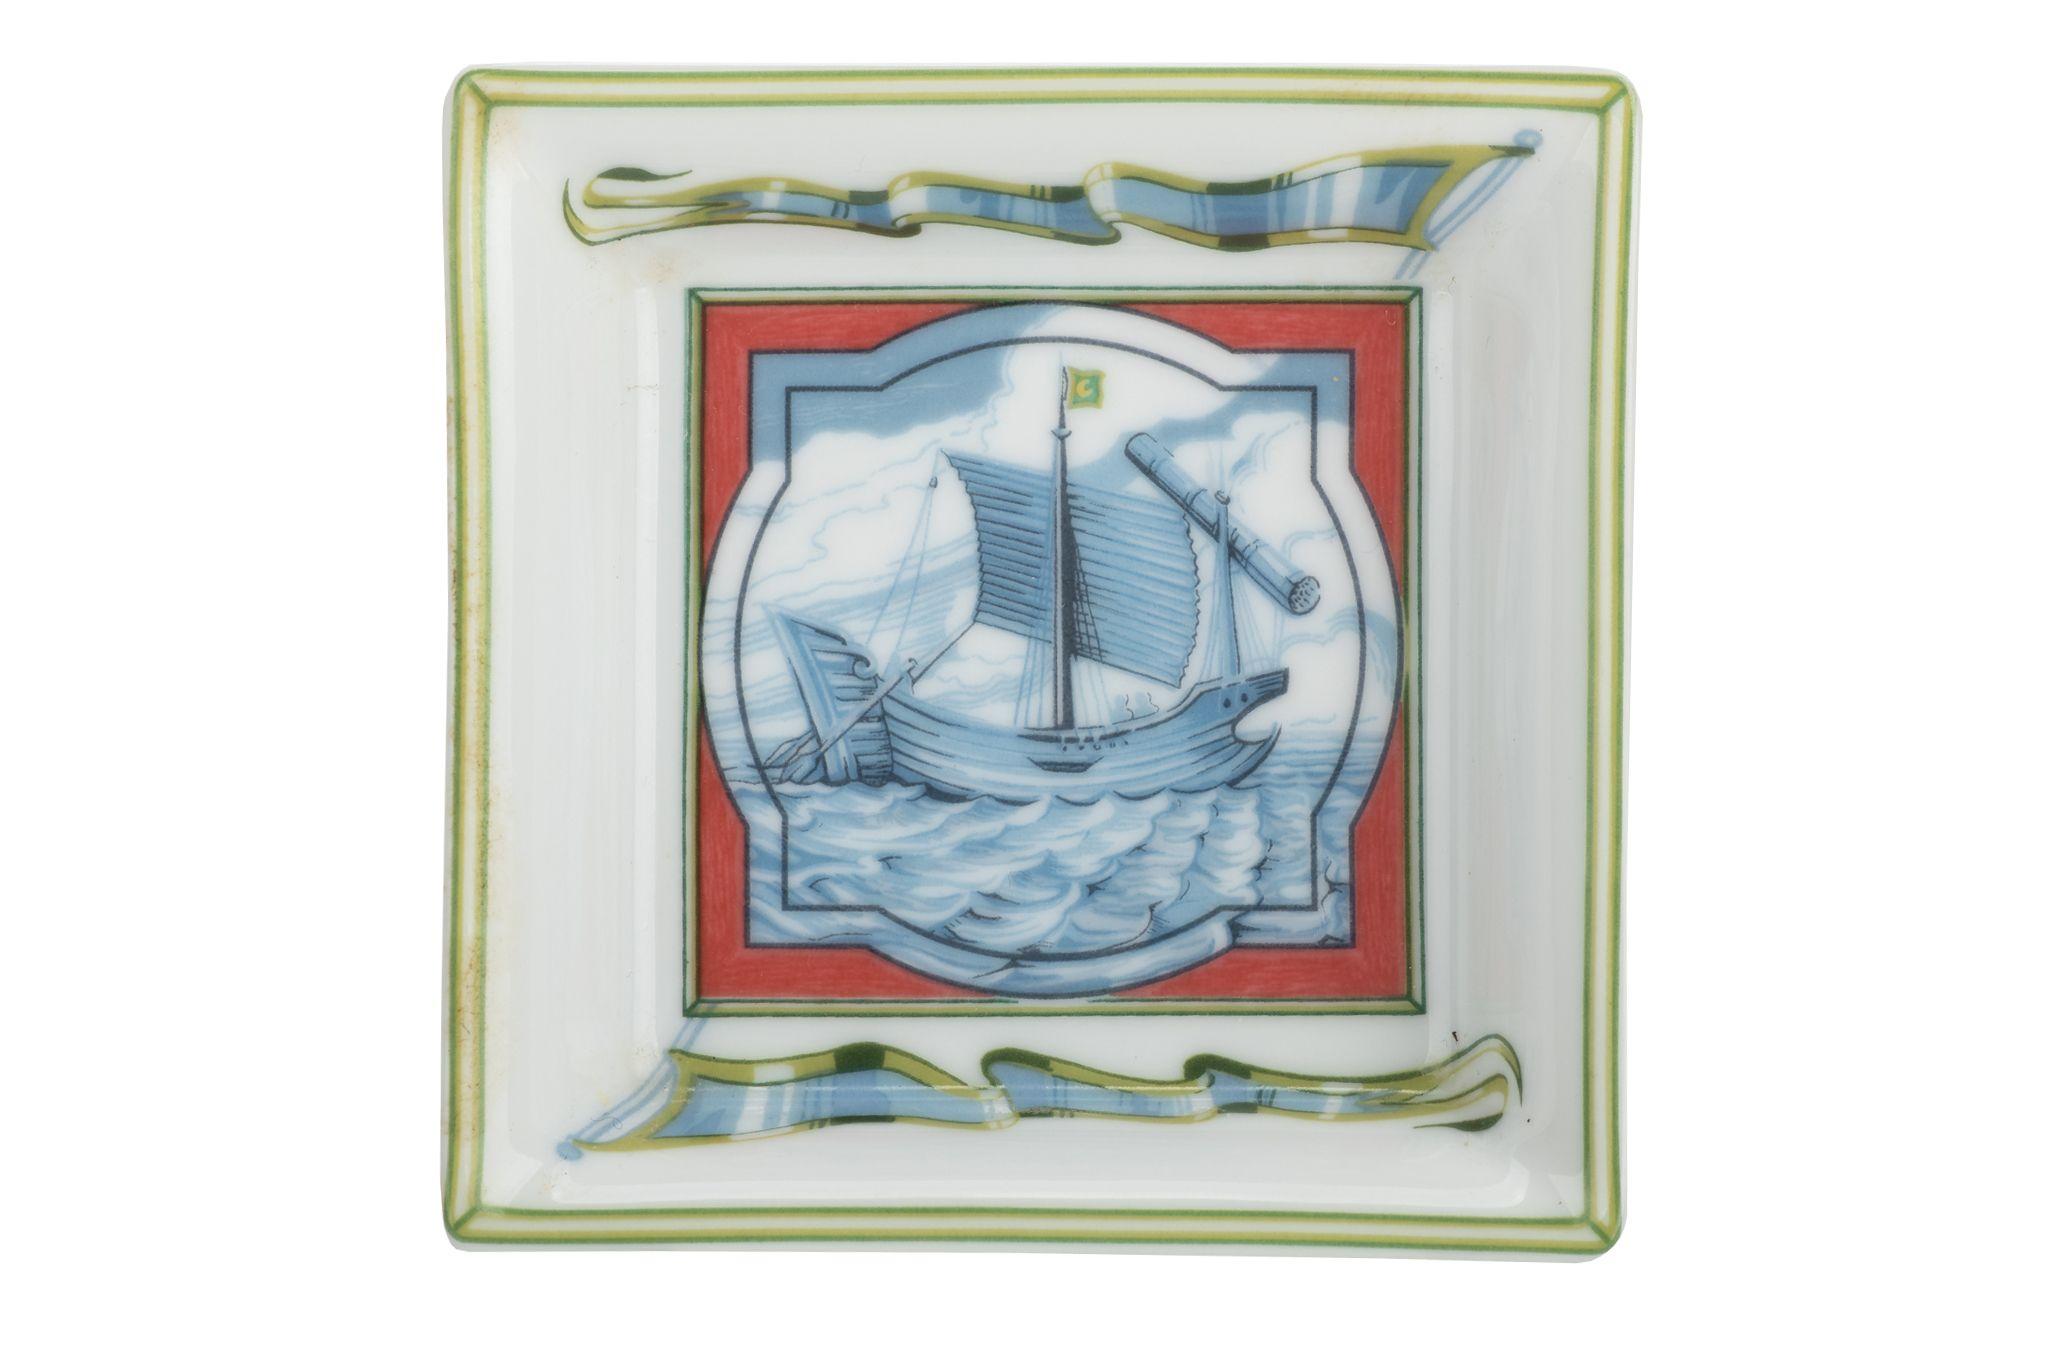 Hermès blue and white ashtray. The tray is painted with a sailing ship in the middle and is square. It is in excellent condition.